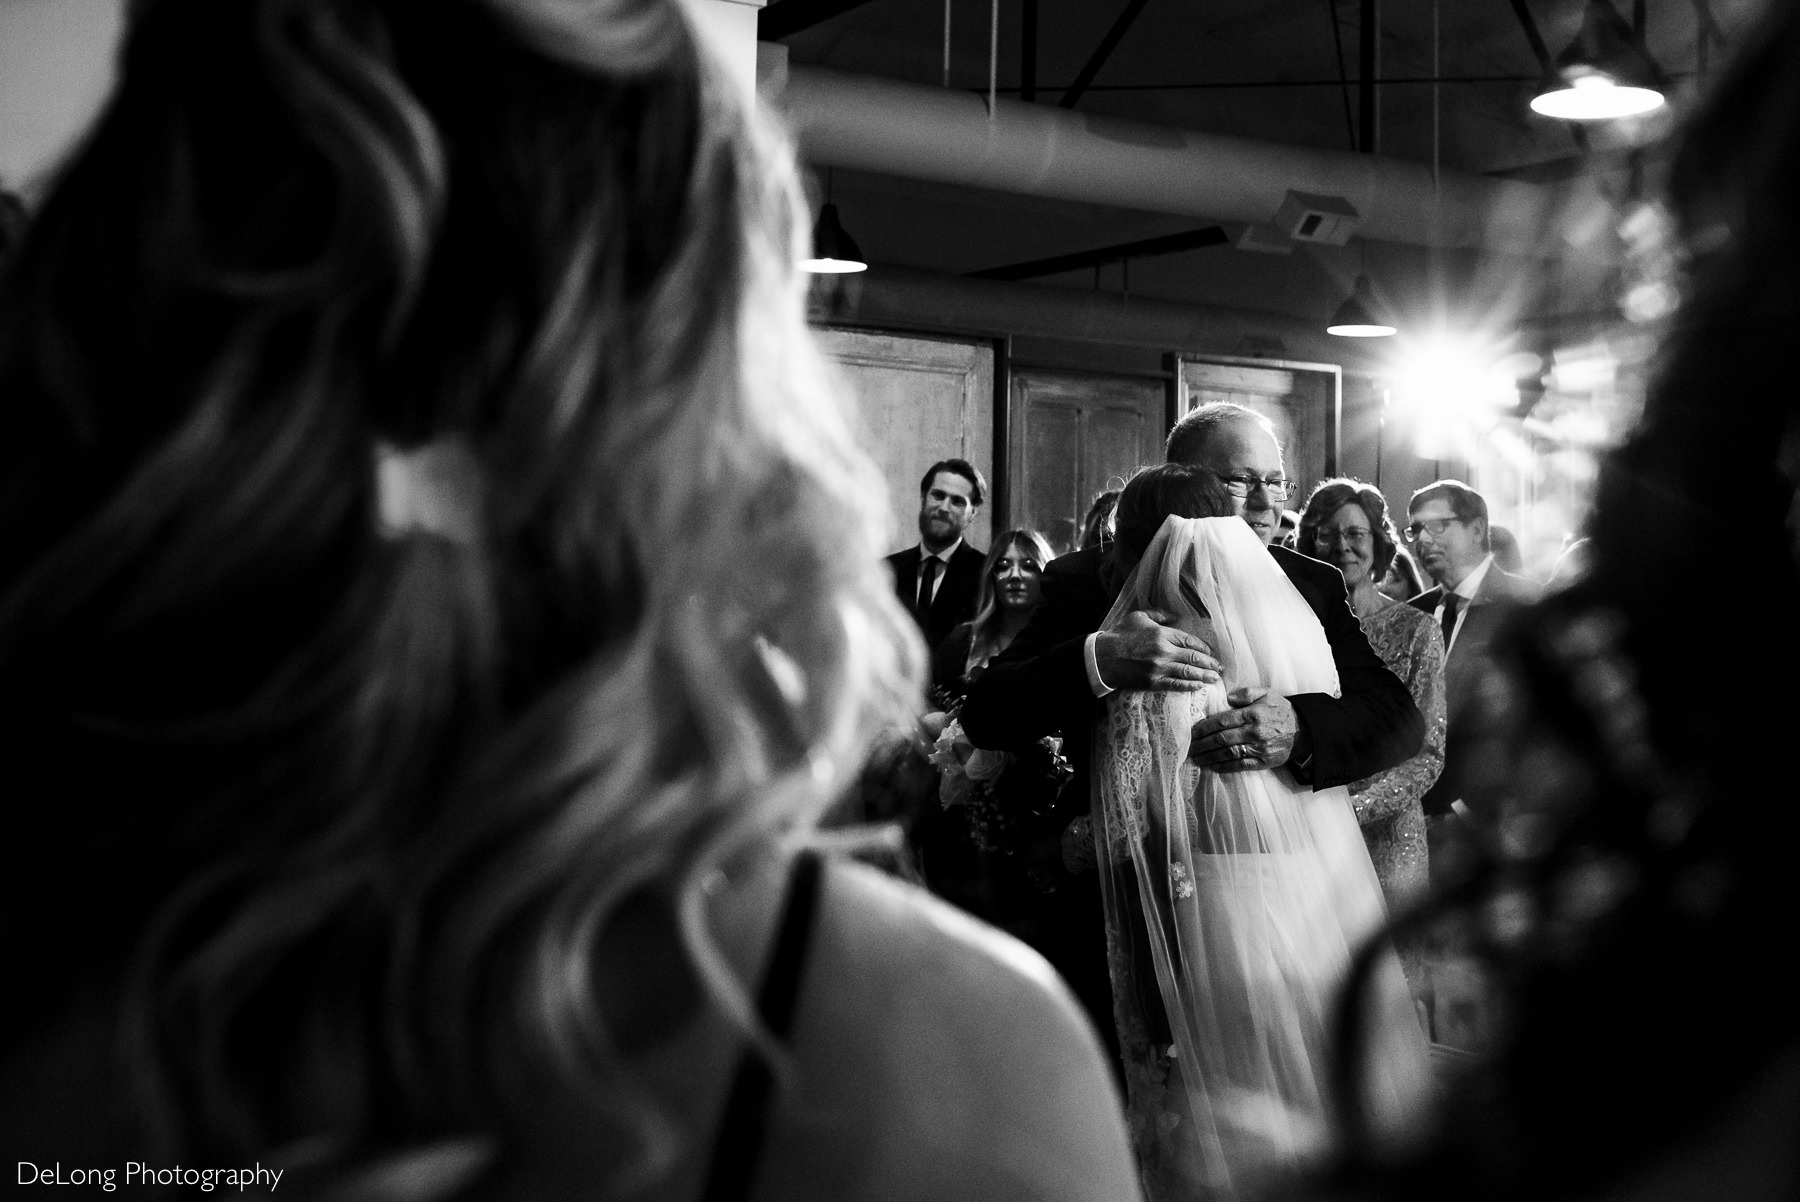 Photograph taken between two bridesmaids at the front of a wedding ceremony of a father and bride hugging as he gives her away by Charlotte wedding photographers DeLong Photography